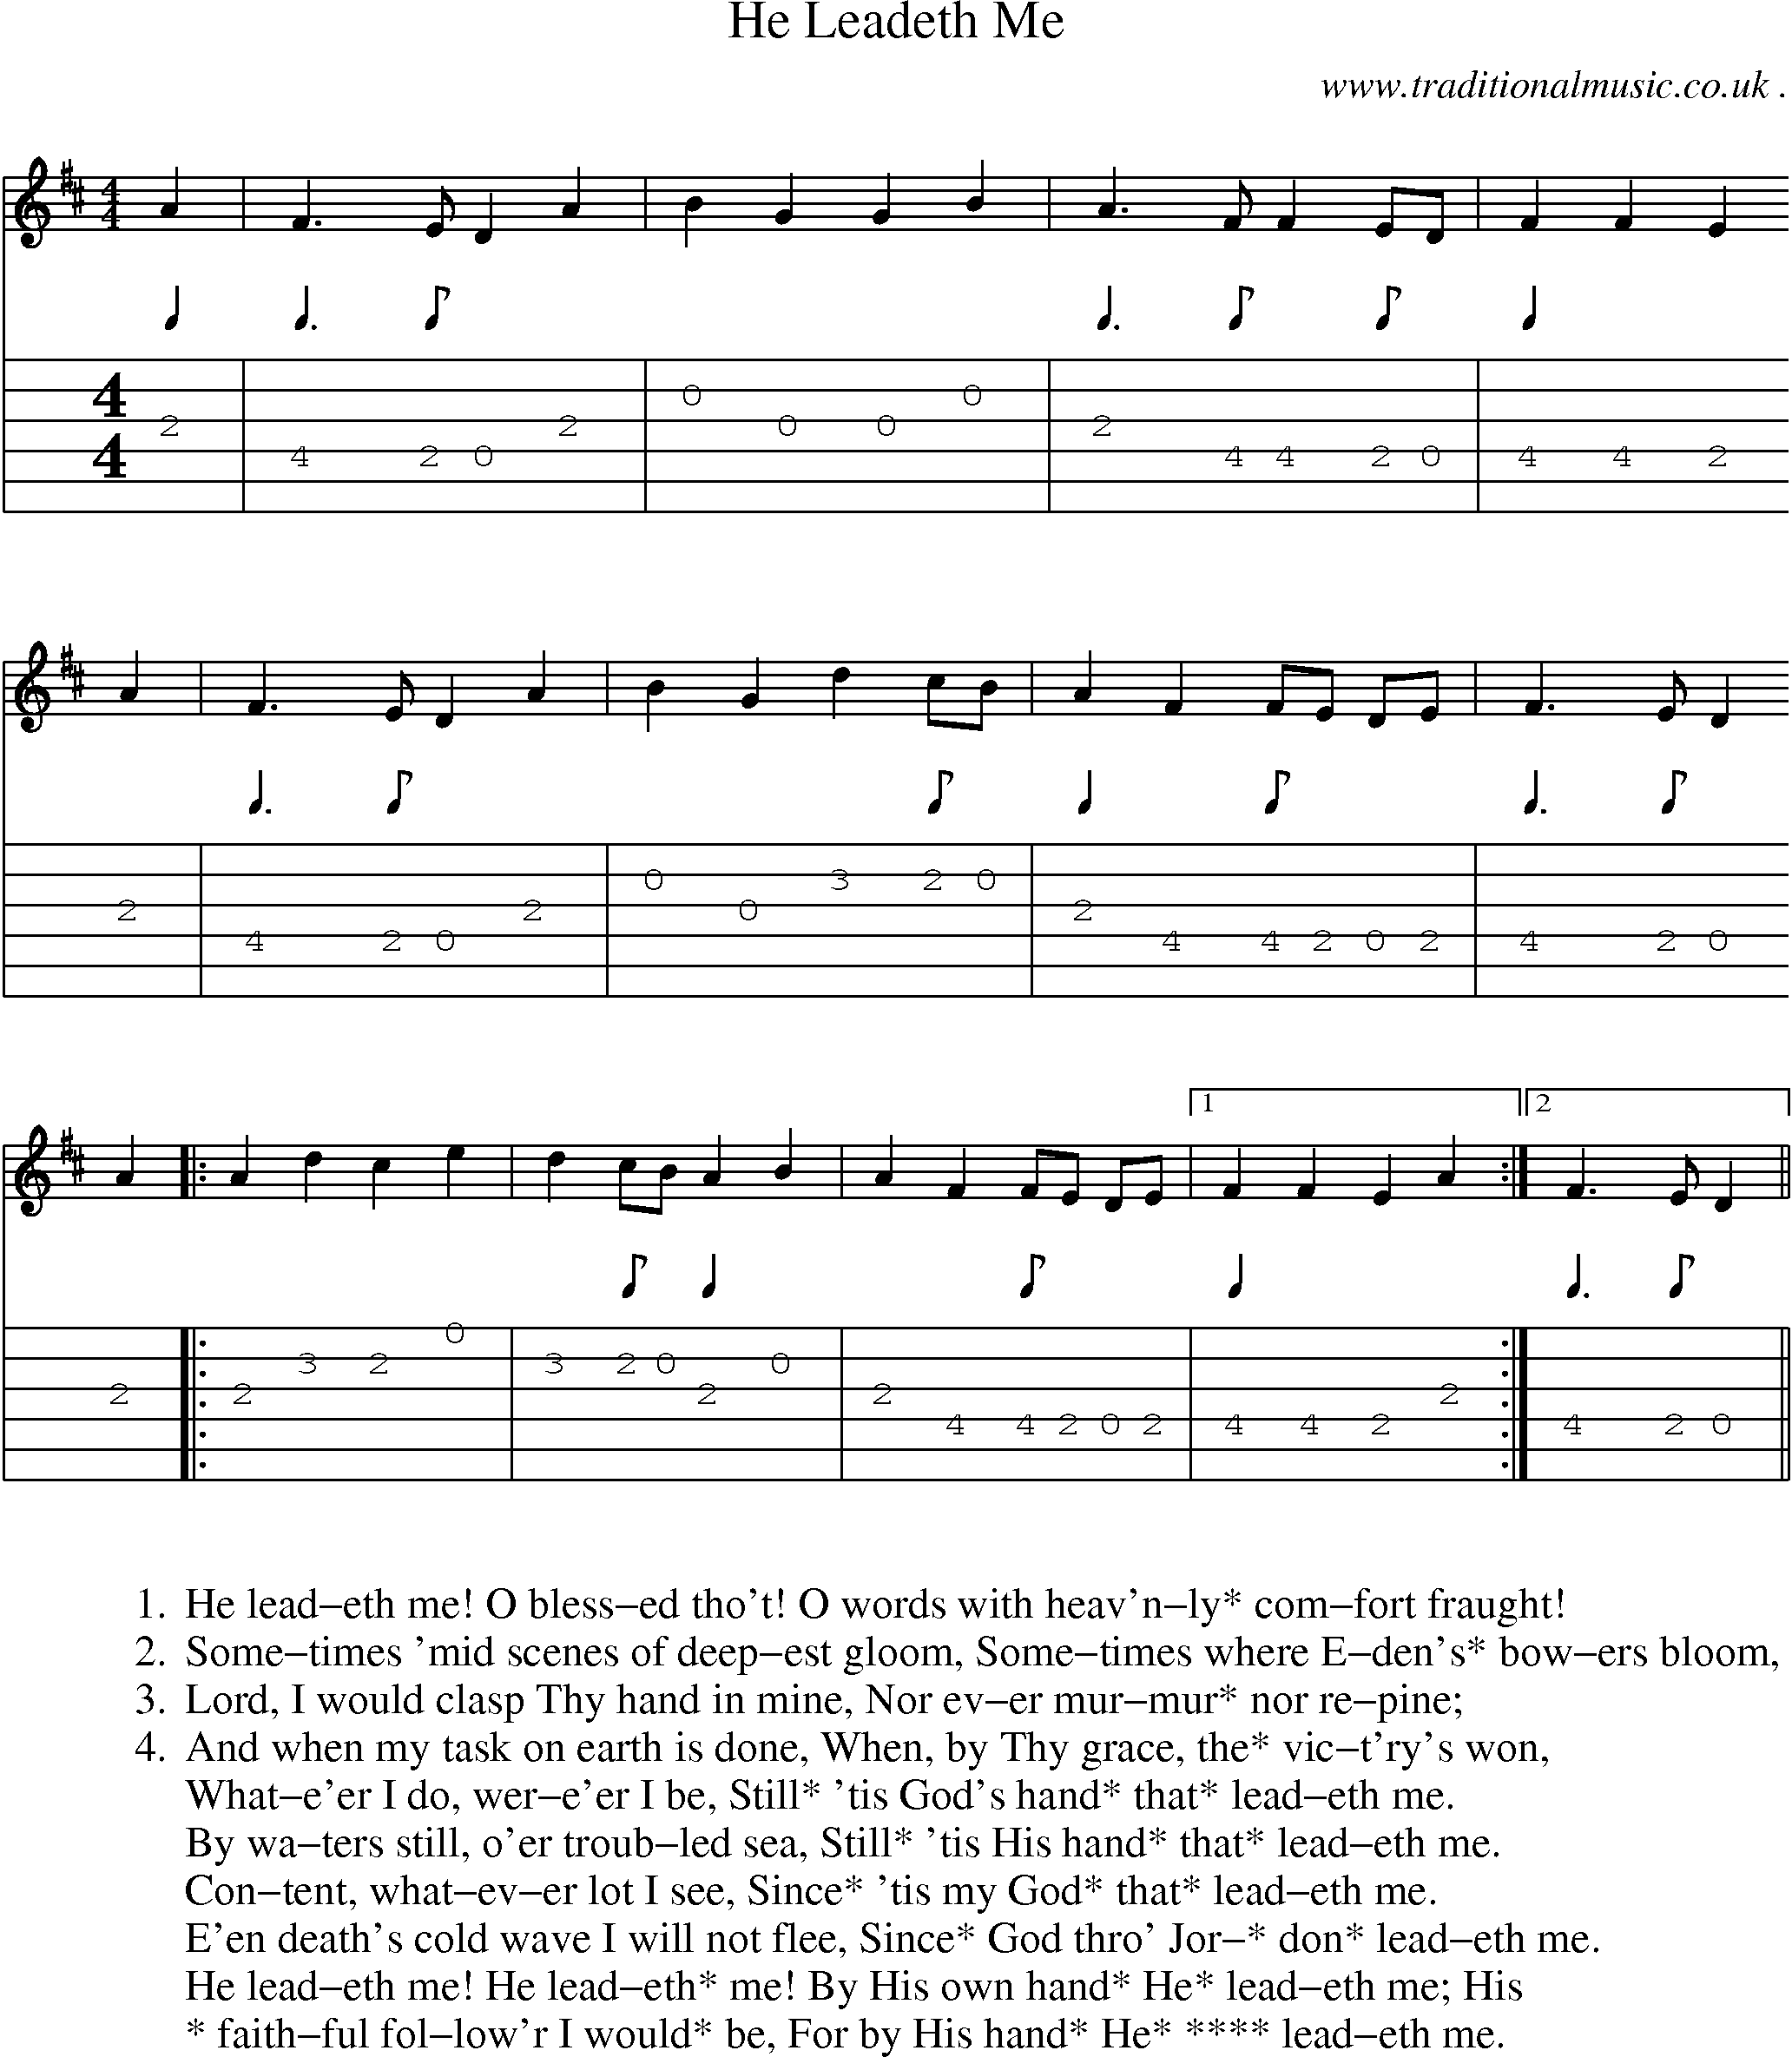 Music Score and Guitar Tabs for He Leadeth Me